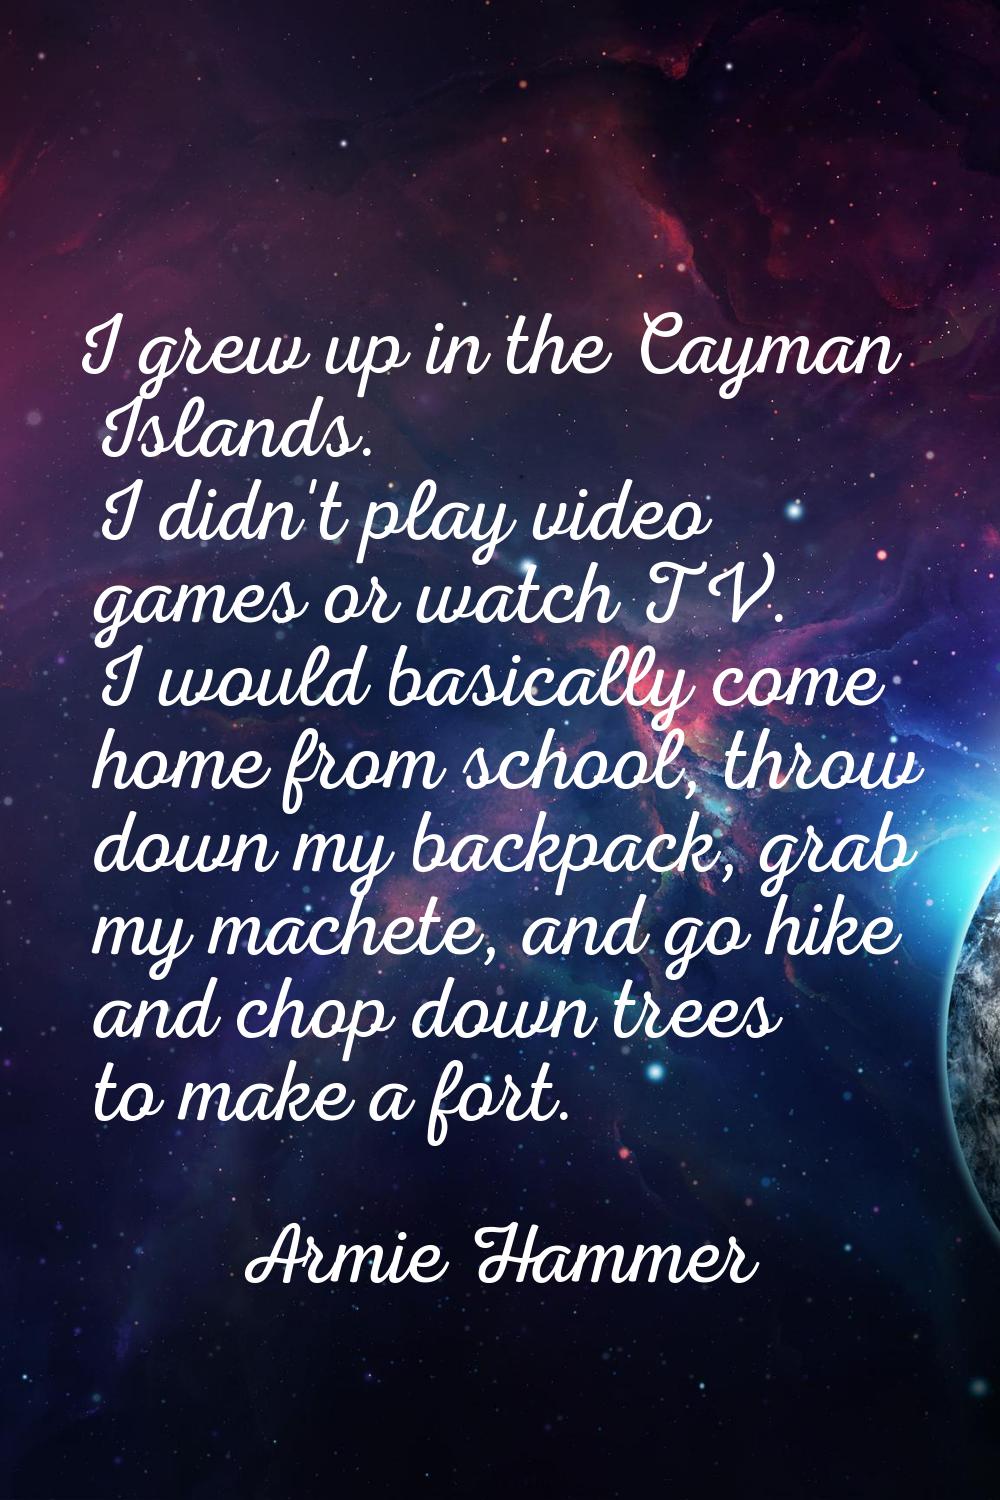 I grew up in the Cayman Islands. I didn't play video games or watch TV. I would basically come home